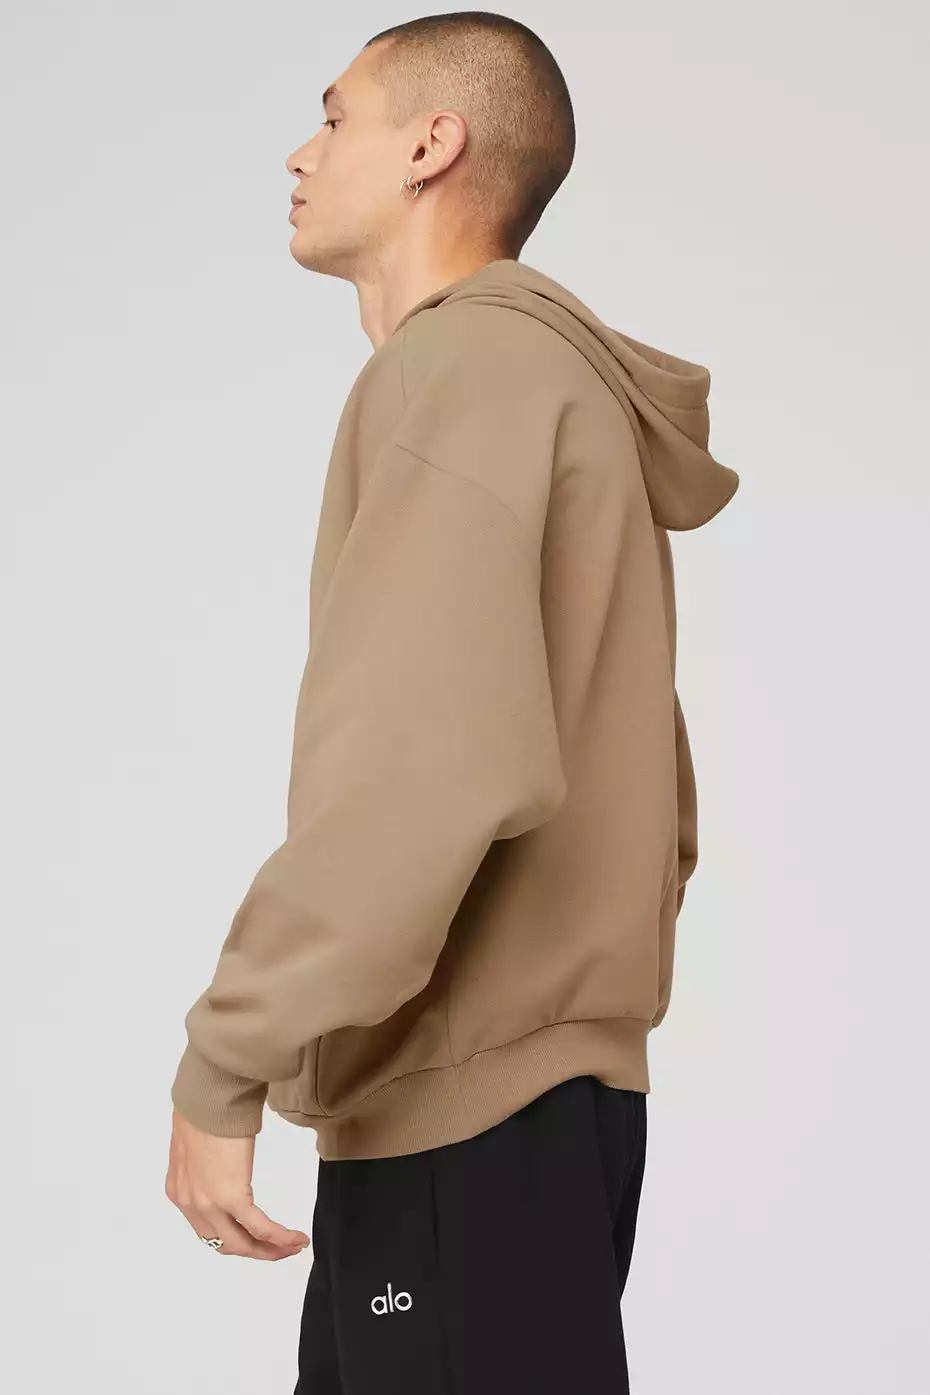 Get Reasonable Price Alo Yoga Accolade Hoodie For Men Dark Olive at great  prices at